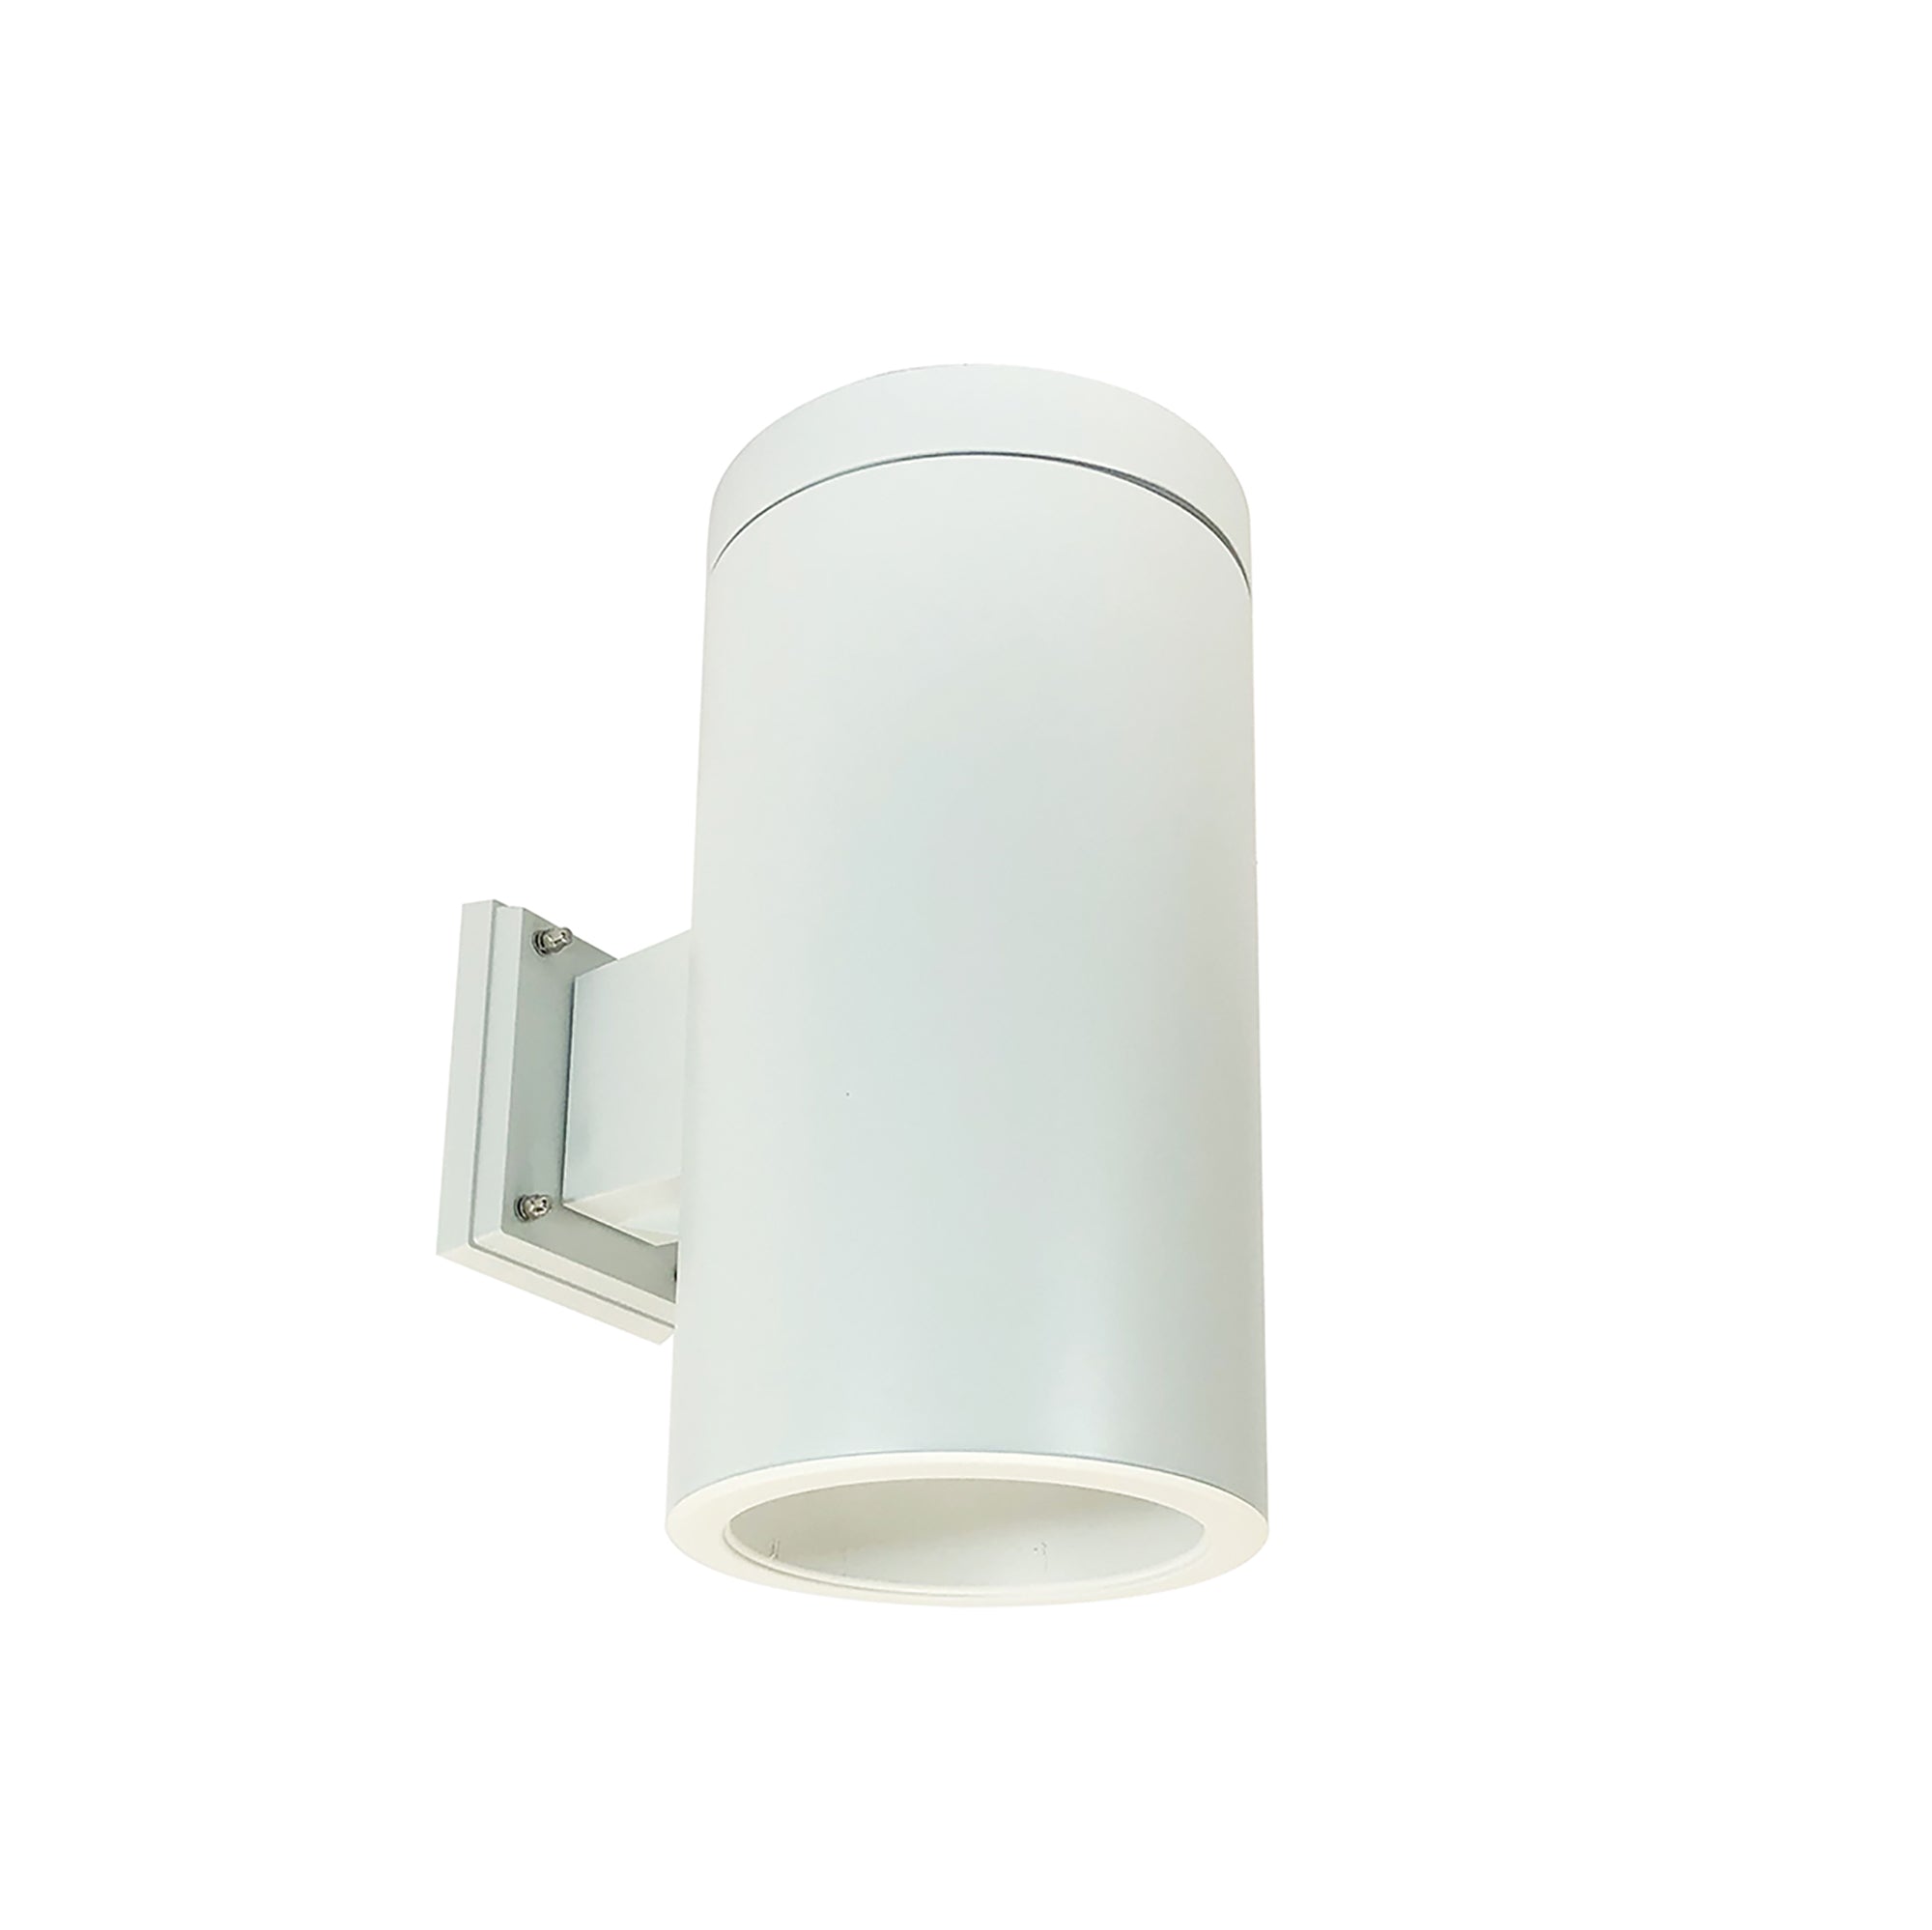 Nora Lighting NYLS2-6W35135FWWW6/PEM - Cylinder - 6 Inch CYL WALL MNT 3500L 35K REF. FLD. WH/WH FLANGE 120-277V WH CYL, WIRED FOR EM